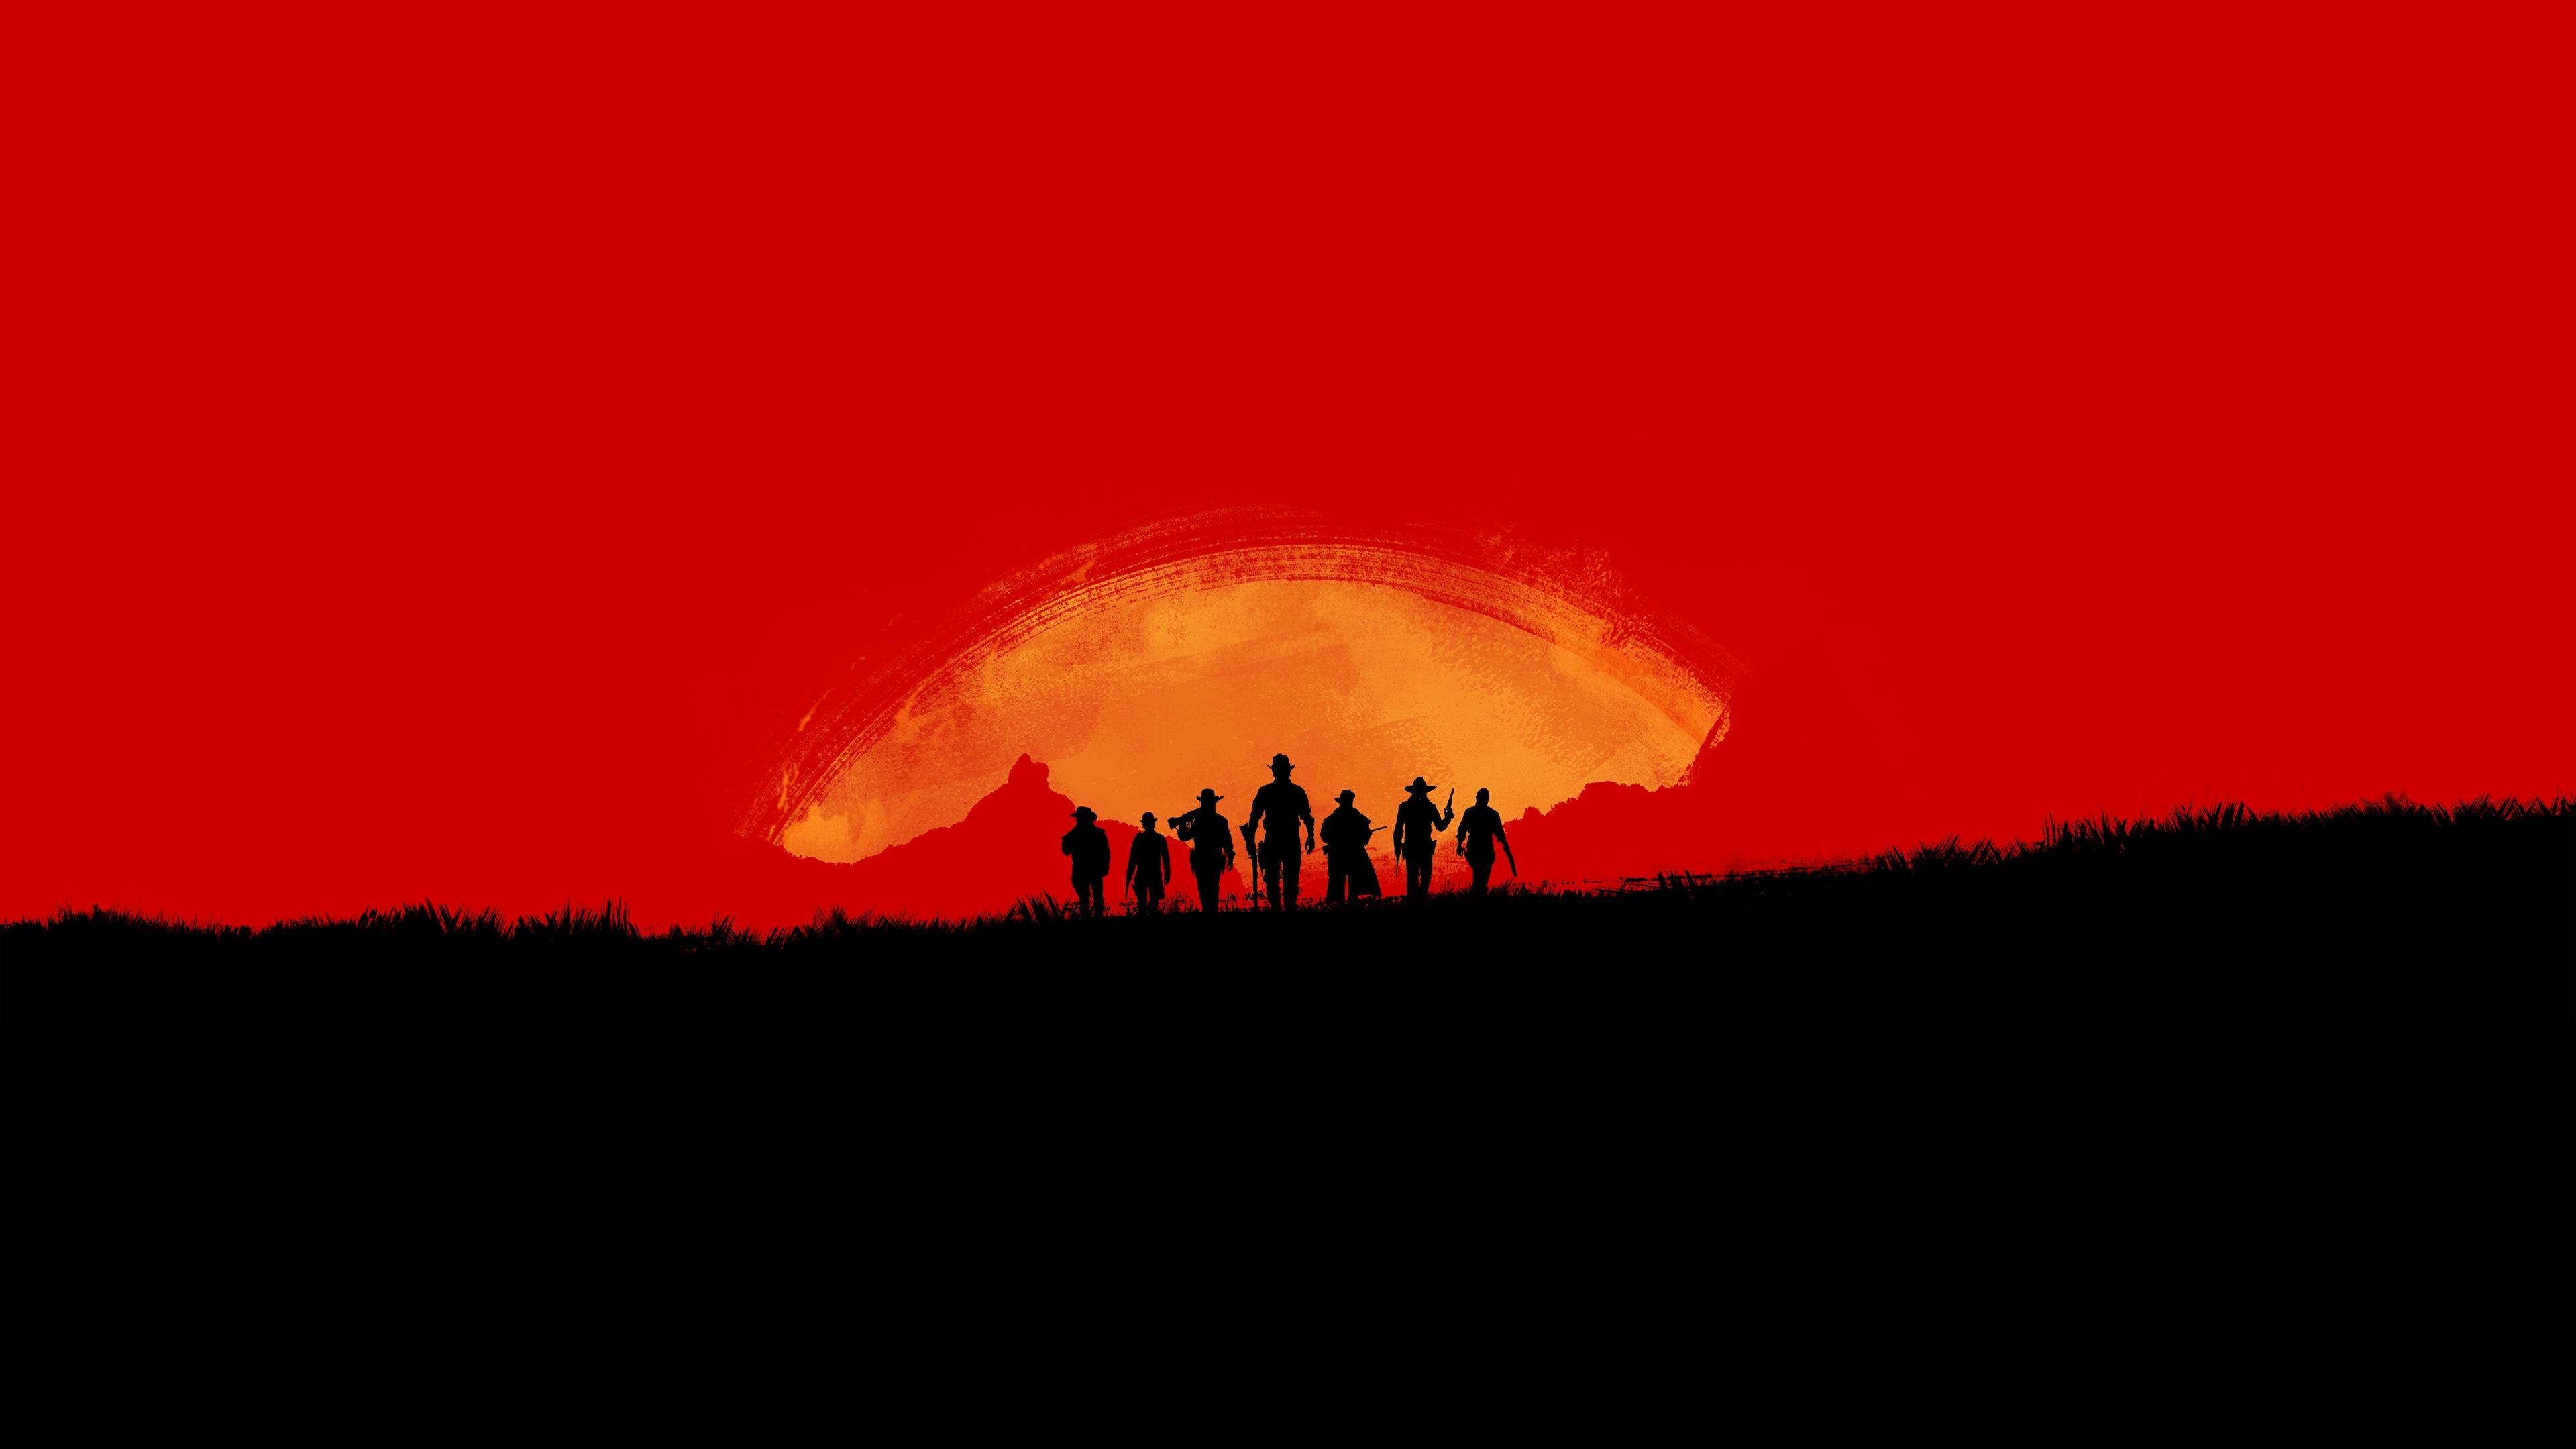 Red Dead Redemption 2 Gang Video Game 4K UHD Wallpapers